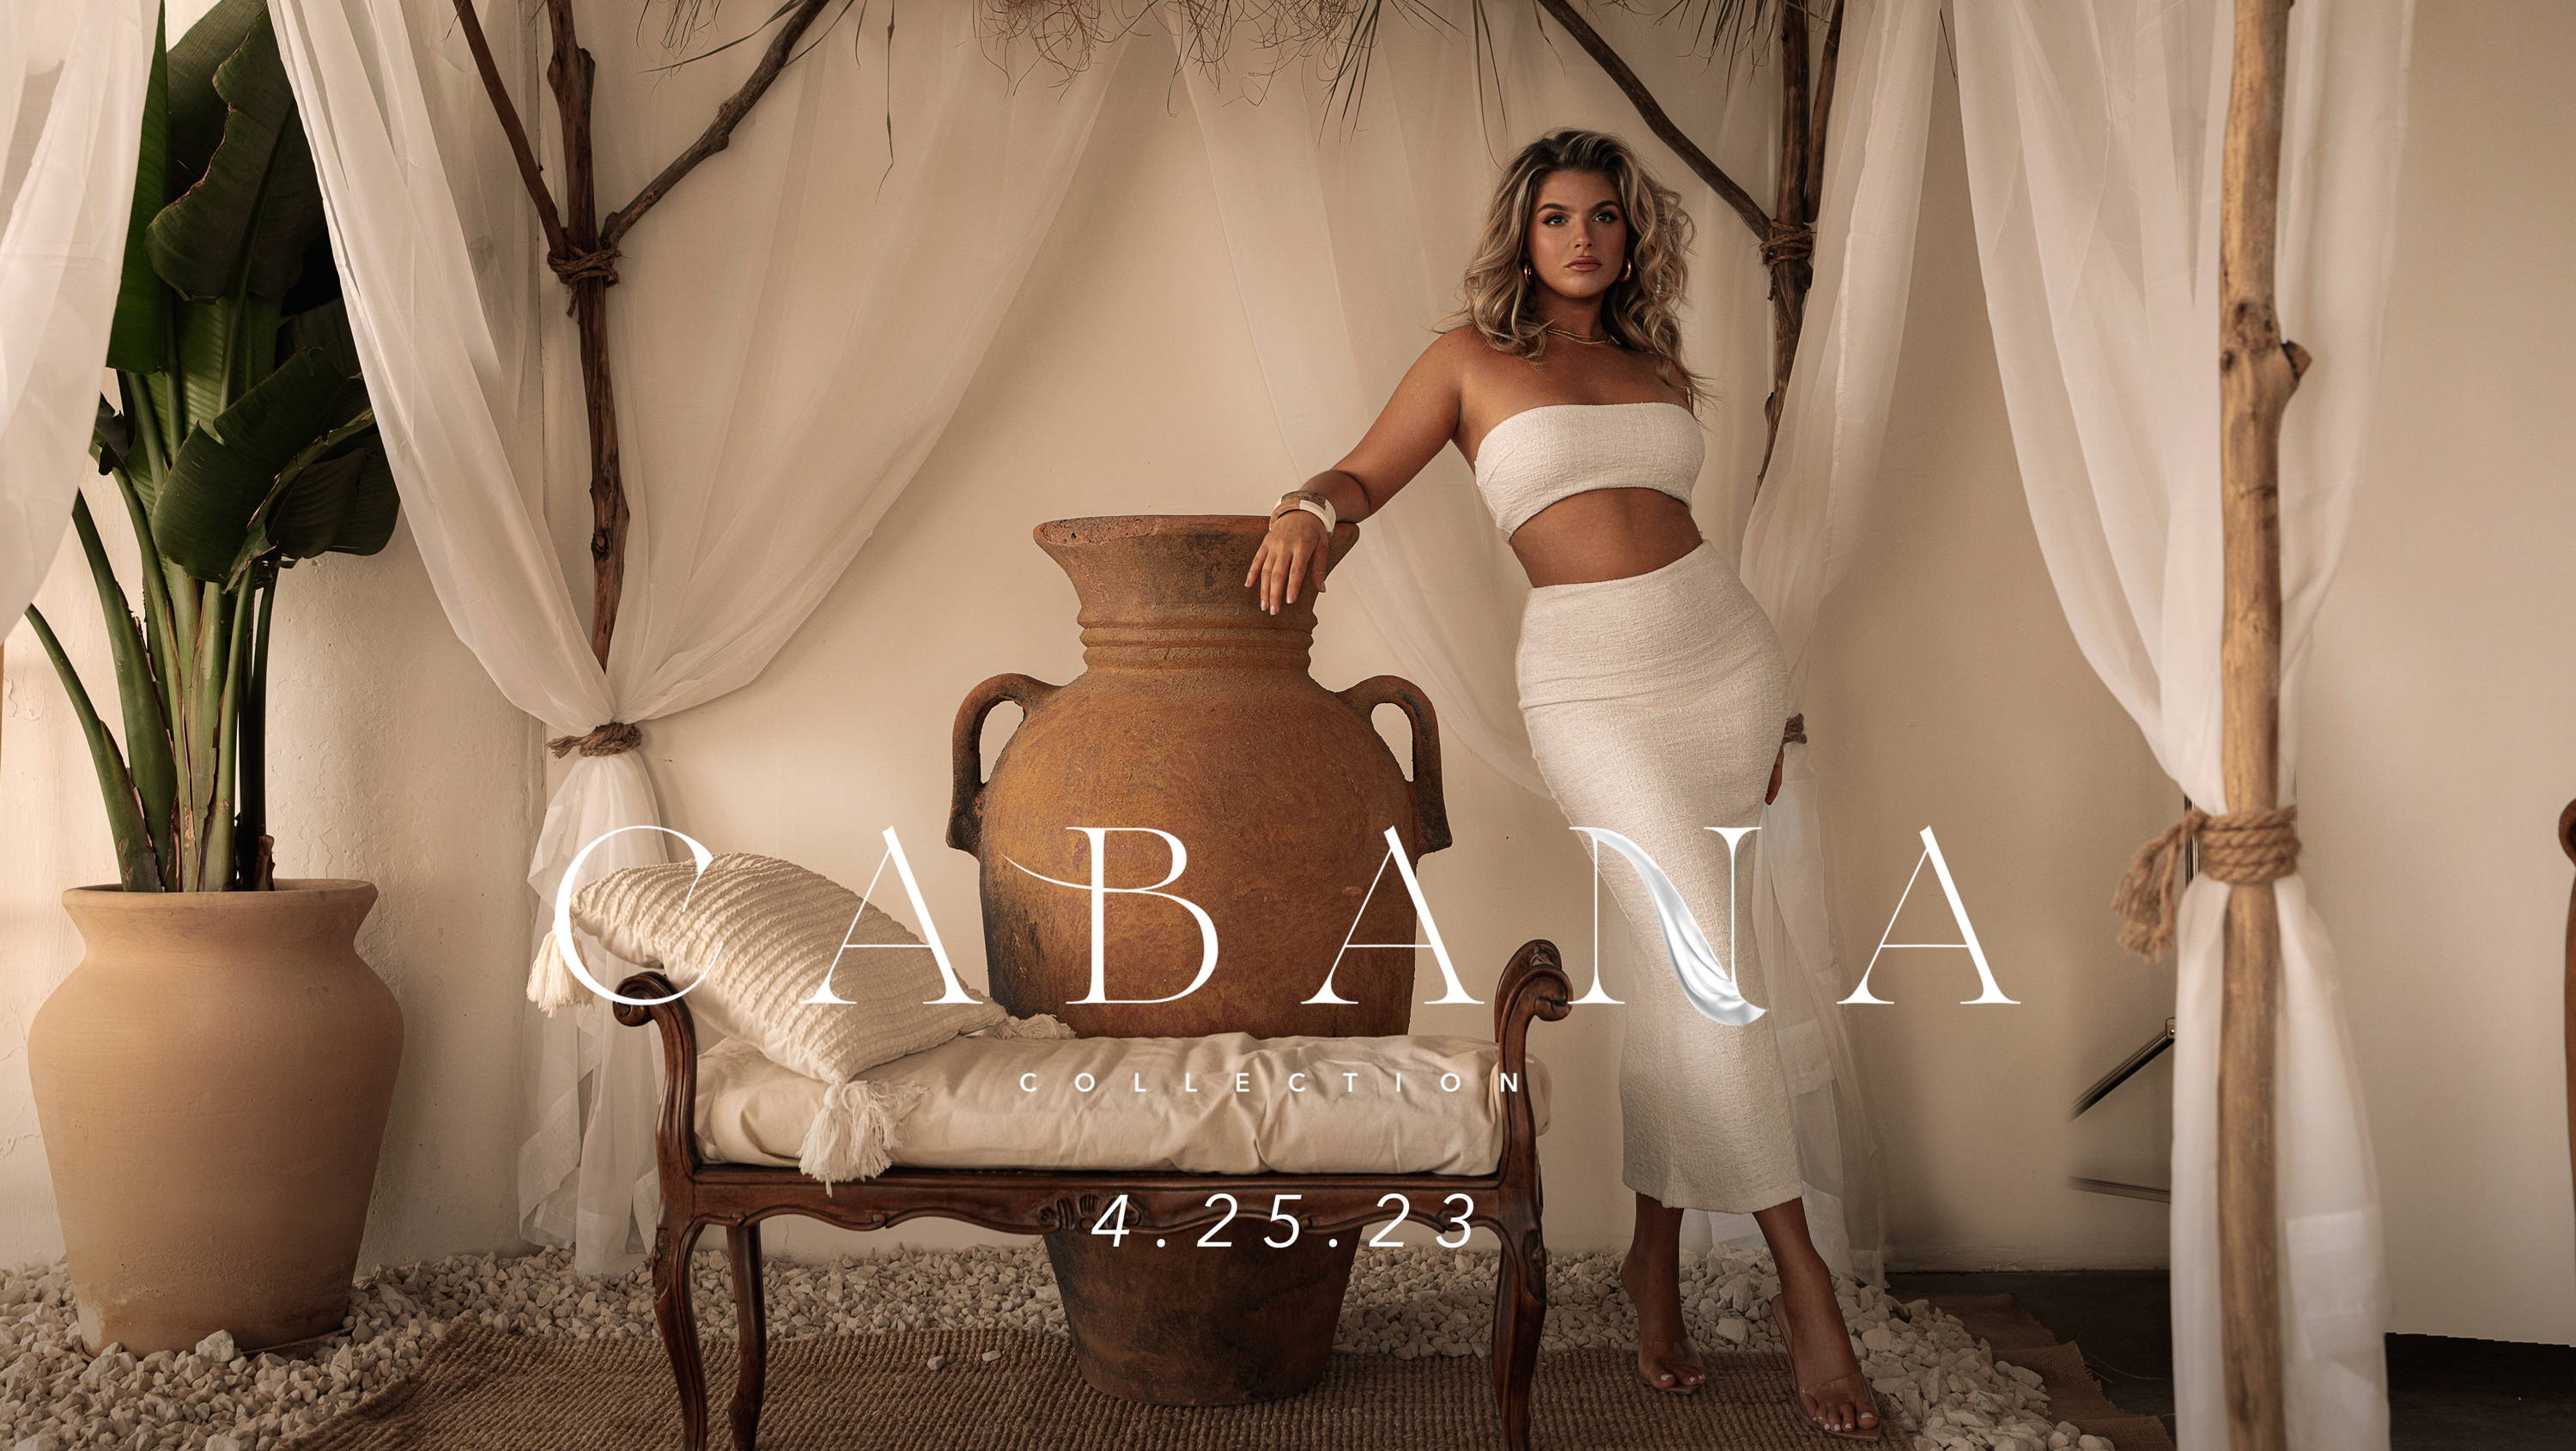 Indulge in coastal serenity with our newest designs, The CABANA collection. Experience a world of adventure in styles designed to help you relax and unwind. You will find relaxing silhouettes crafted in breathable mesh and airy linens that sway like the ocean breeze. Your invitation to balance, tranquility and PARADISE is here!